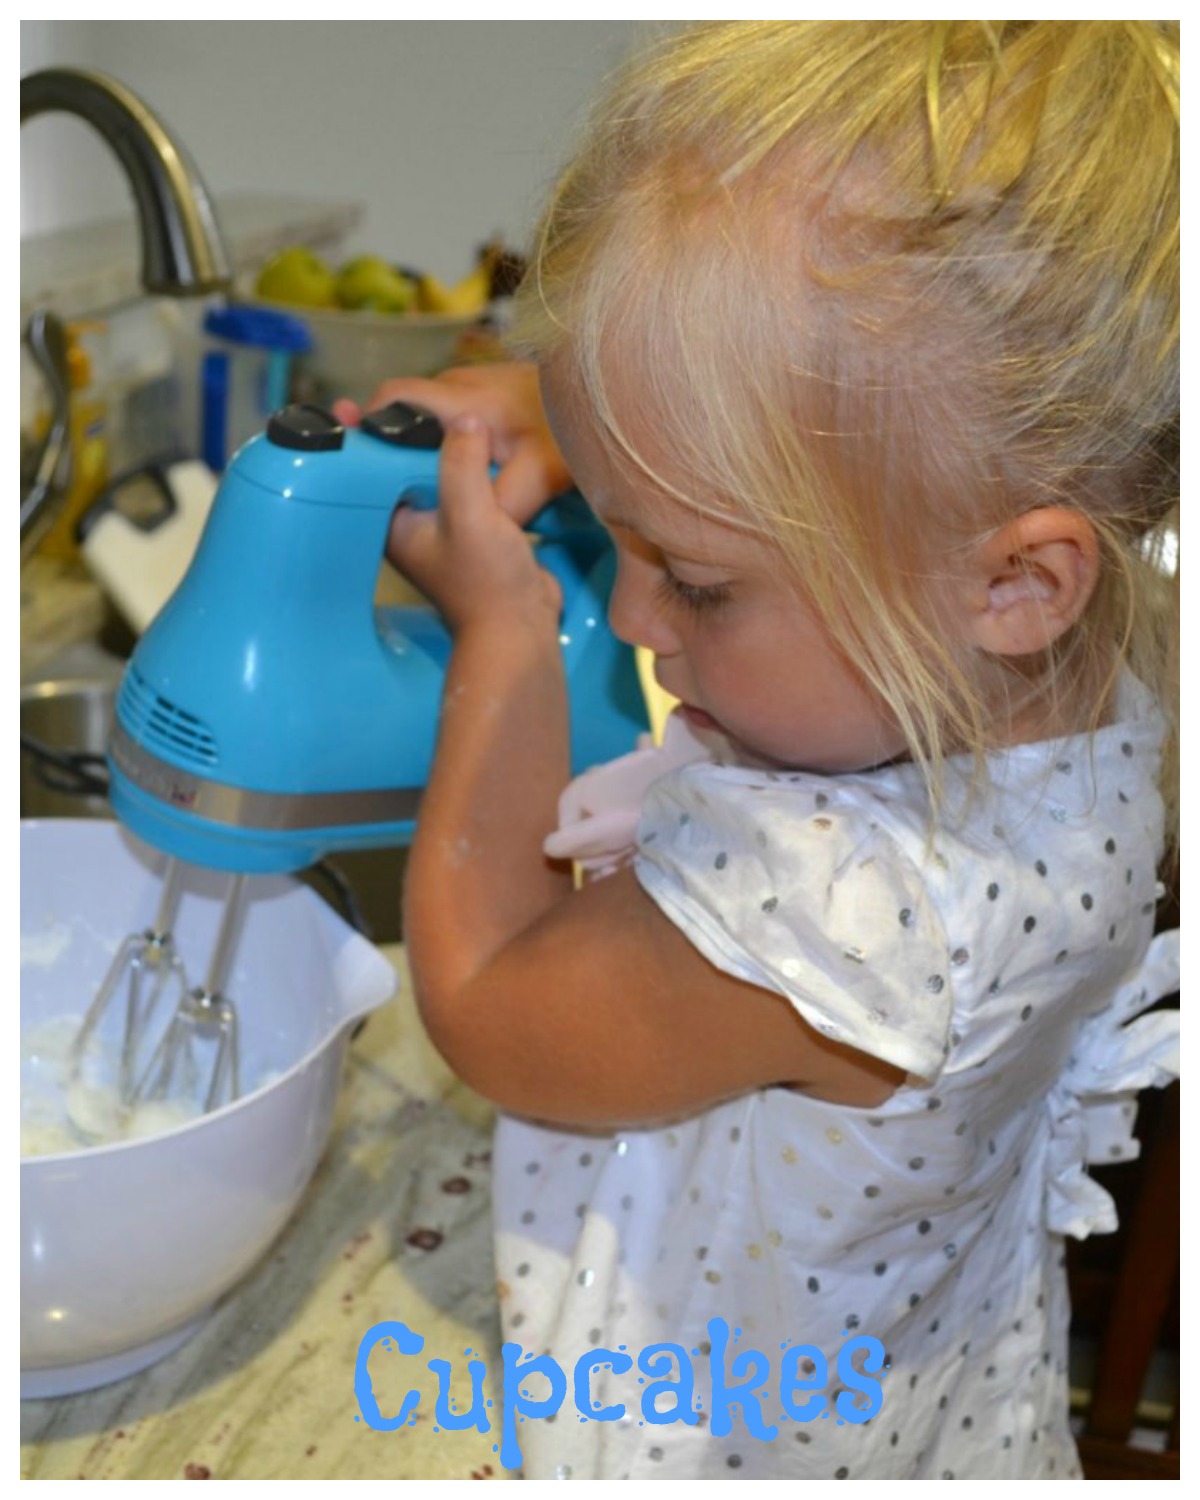 frosting and decorating cupcakes, kids cooking